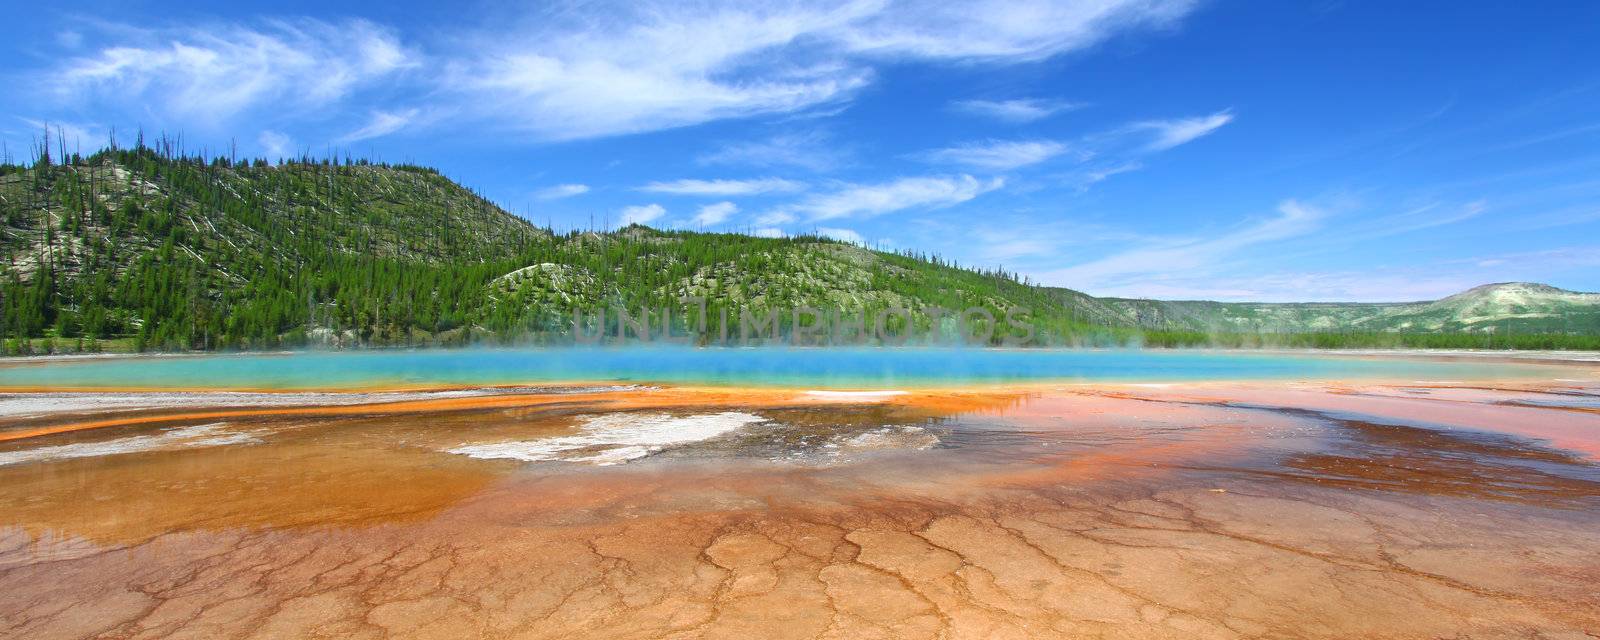 Grand Prismatic Spring - Yellowstone by Wirepec